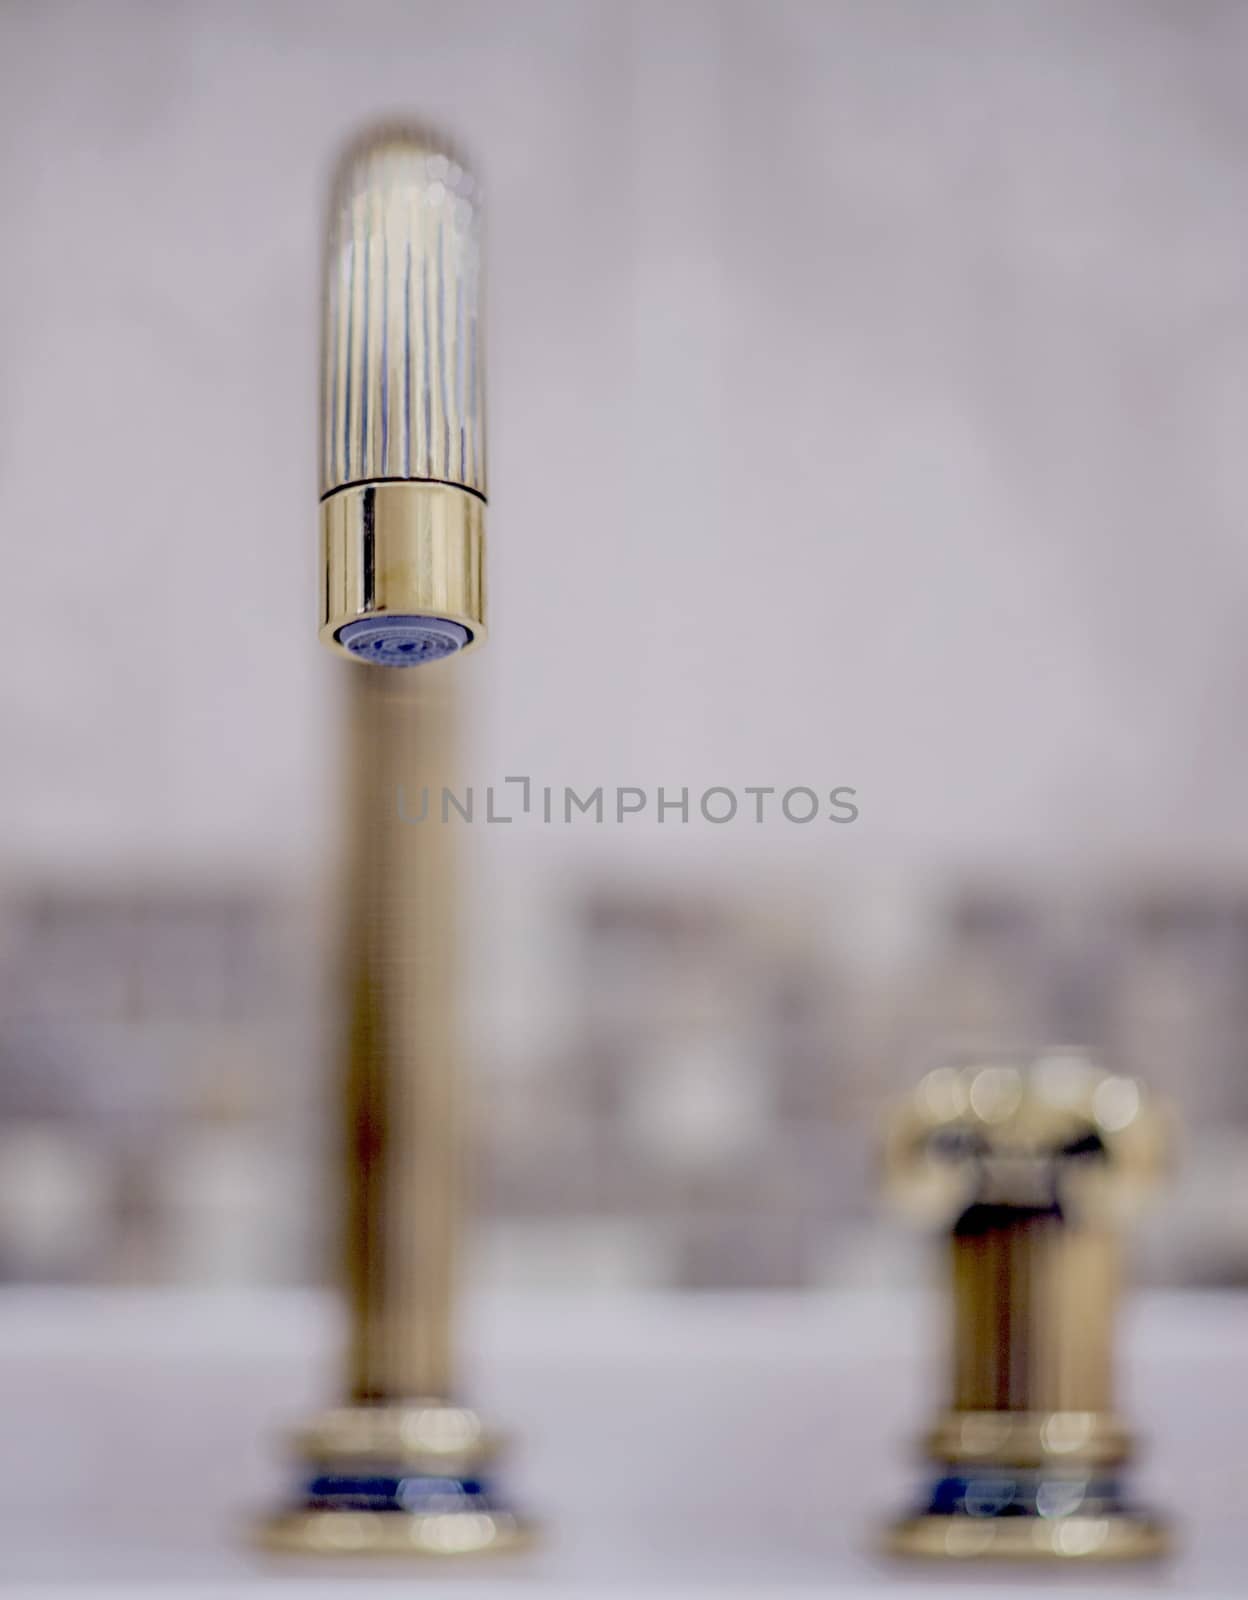 faucet in classic style in bathroom  shallow depth of field